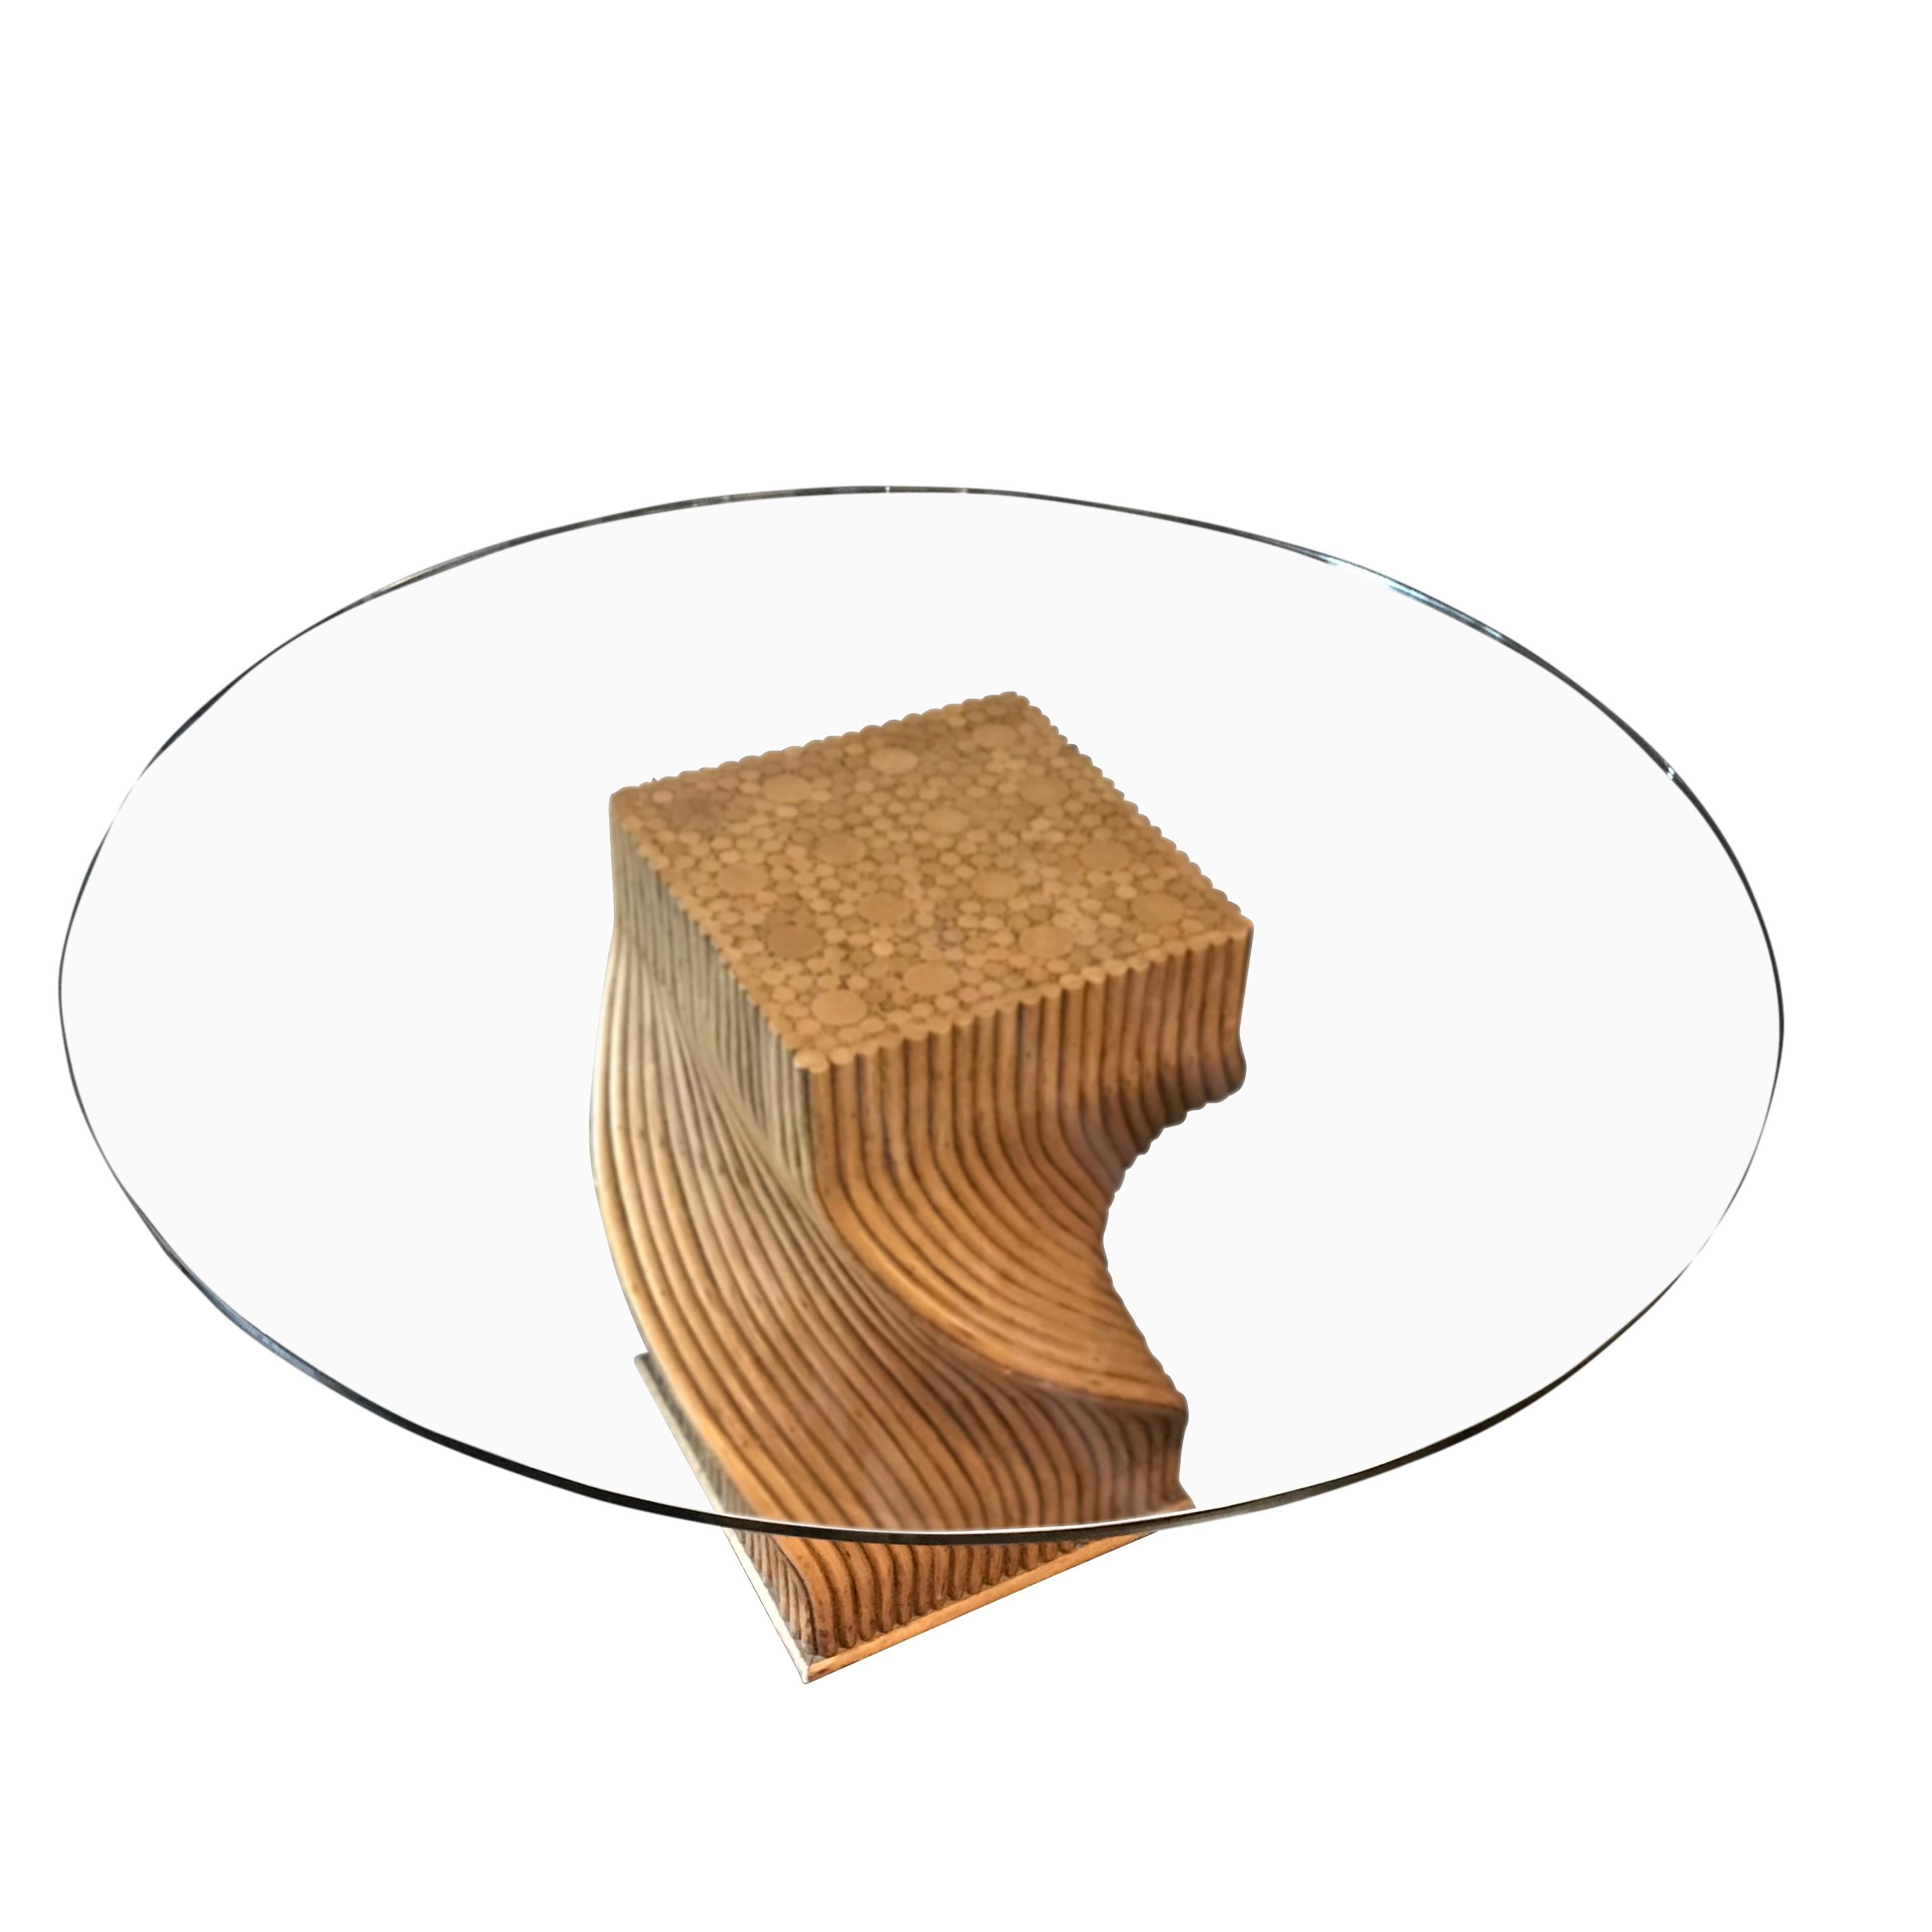 Midcentury French unusual spiral shaped bamboo dining table base.
Measures: Glass top diameter 52